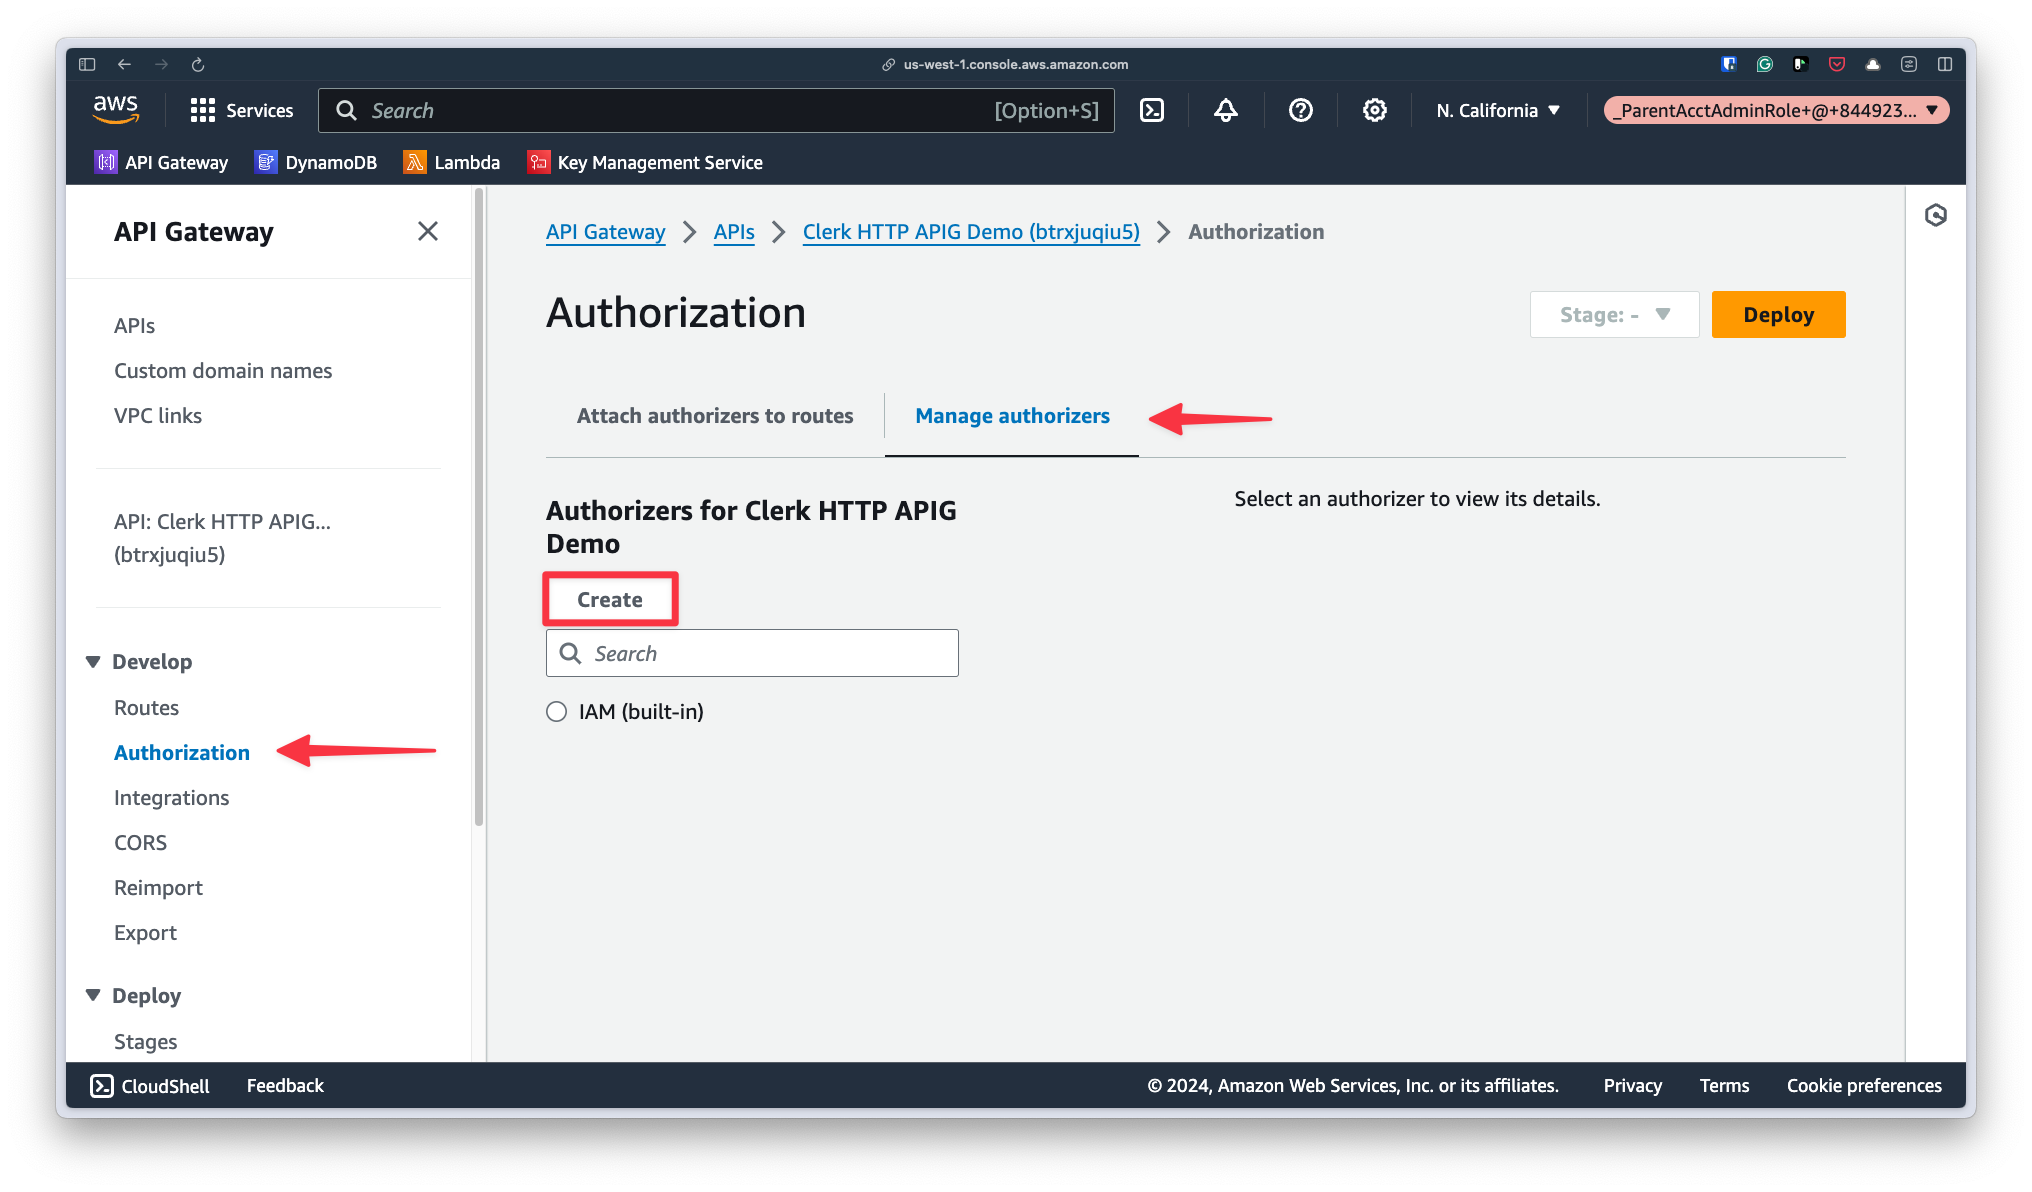 Create an HTTP JWT authorizer